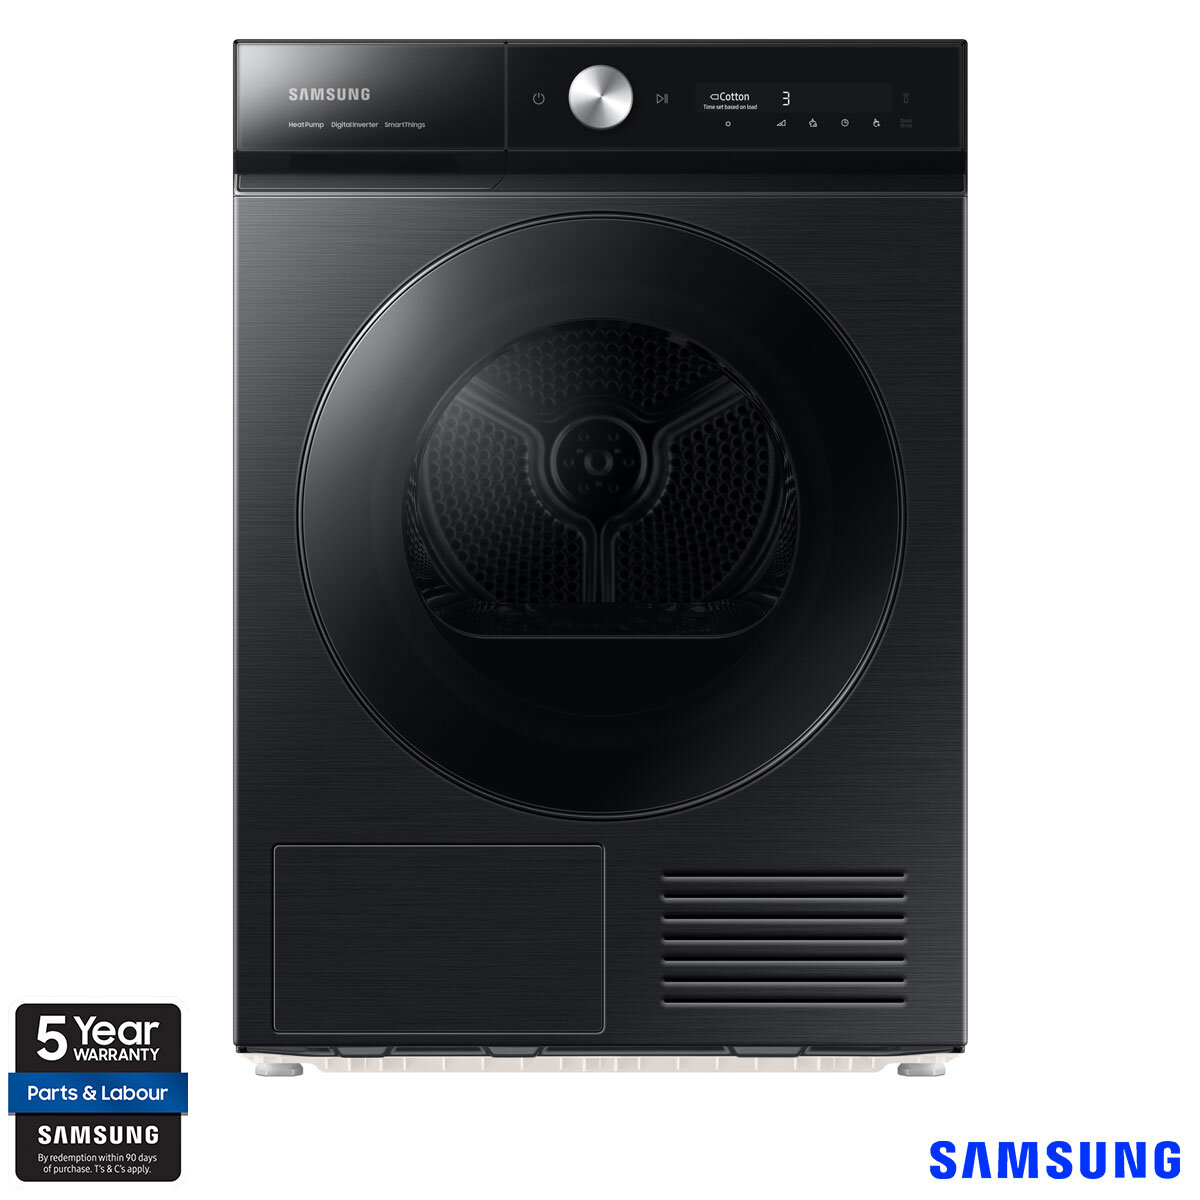 Buy Samsung DV90BB9445GBS1 9kg Heat Pump Tumble Dryer,  A+++ Rated in Black at Costco.co.uk